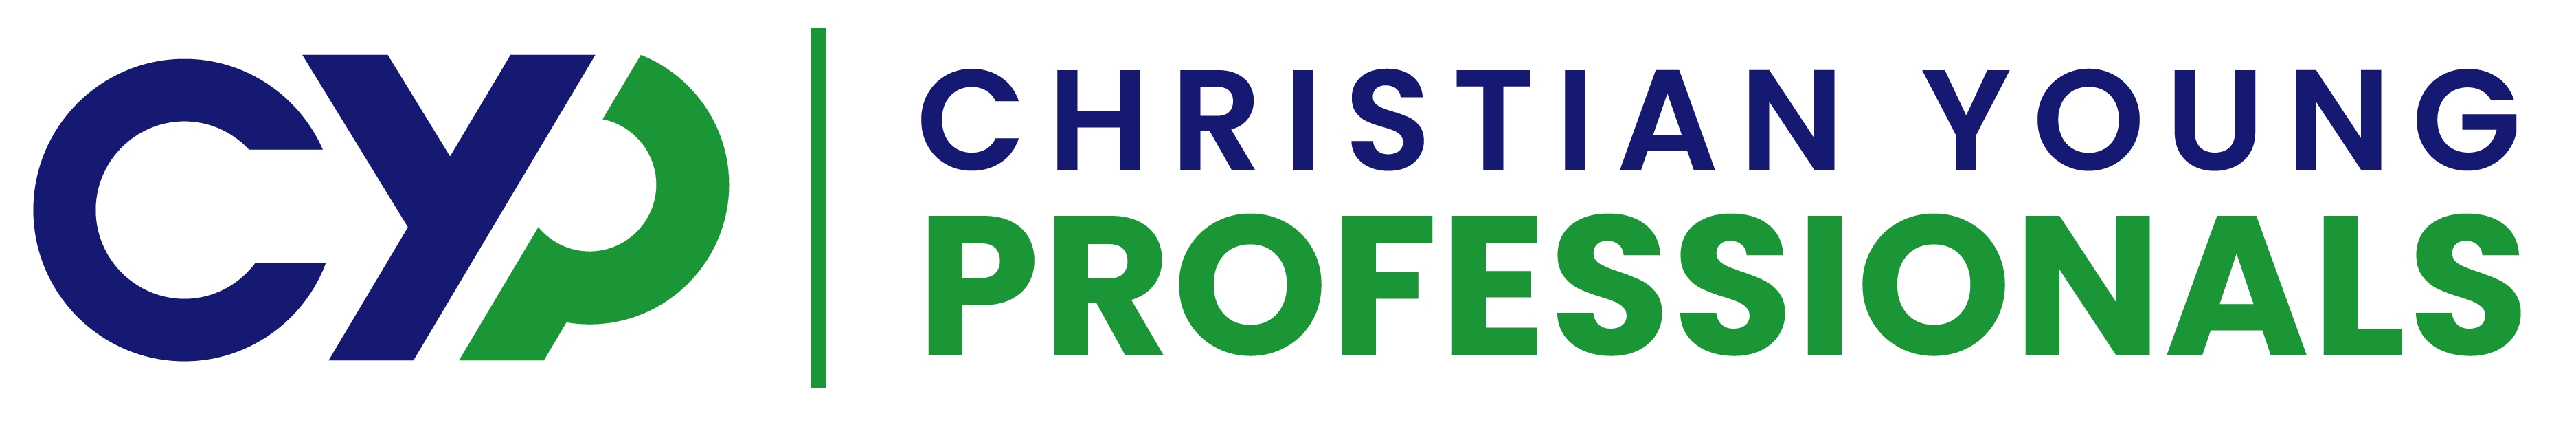 Christian Young Professionals